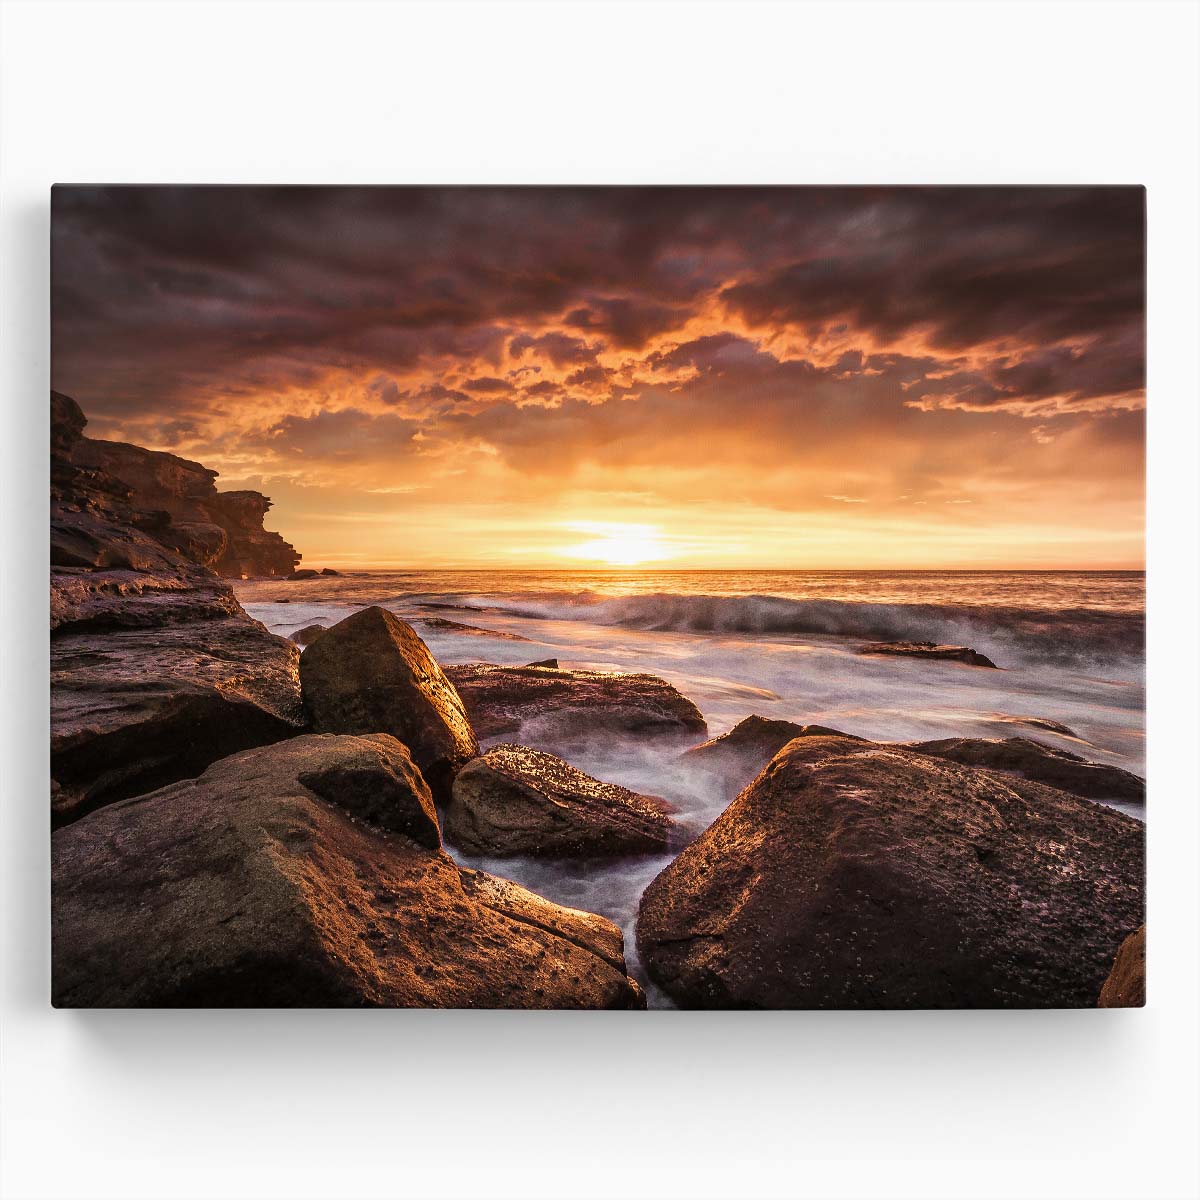 Cape Solander Sunrise Golden Sydney Seascape Photography Wall Art by Luxuriance Designs. Made in USA.